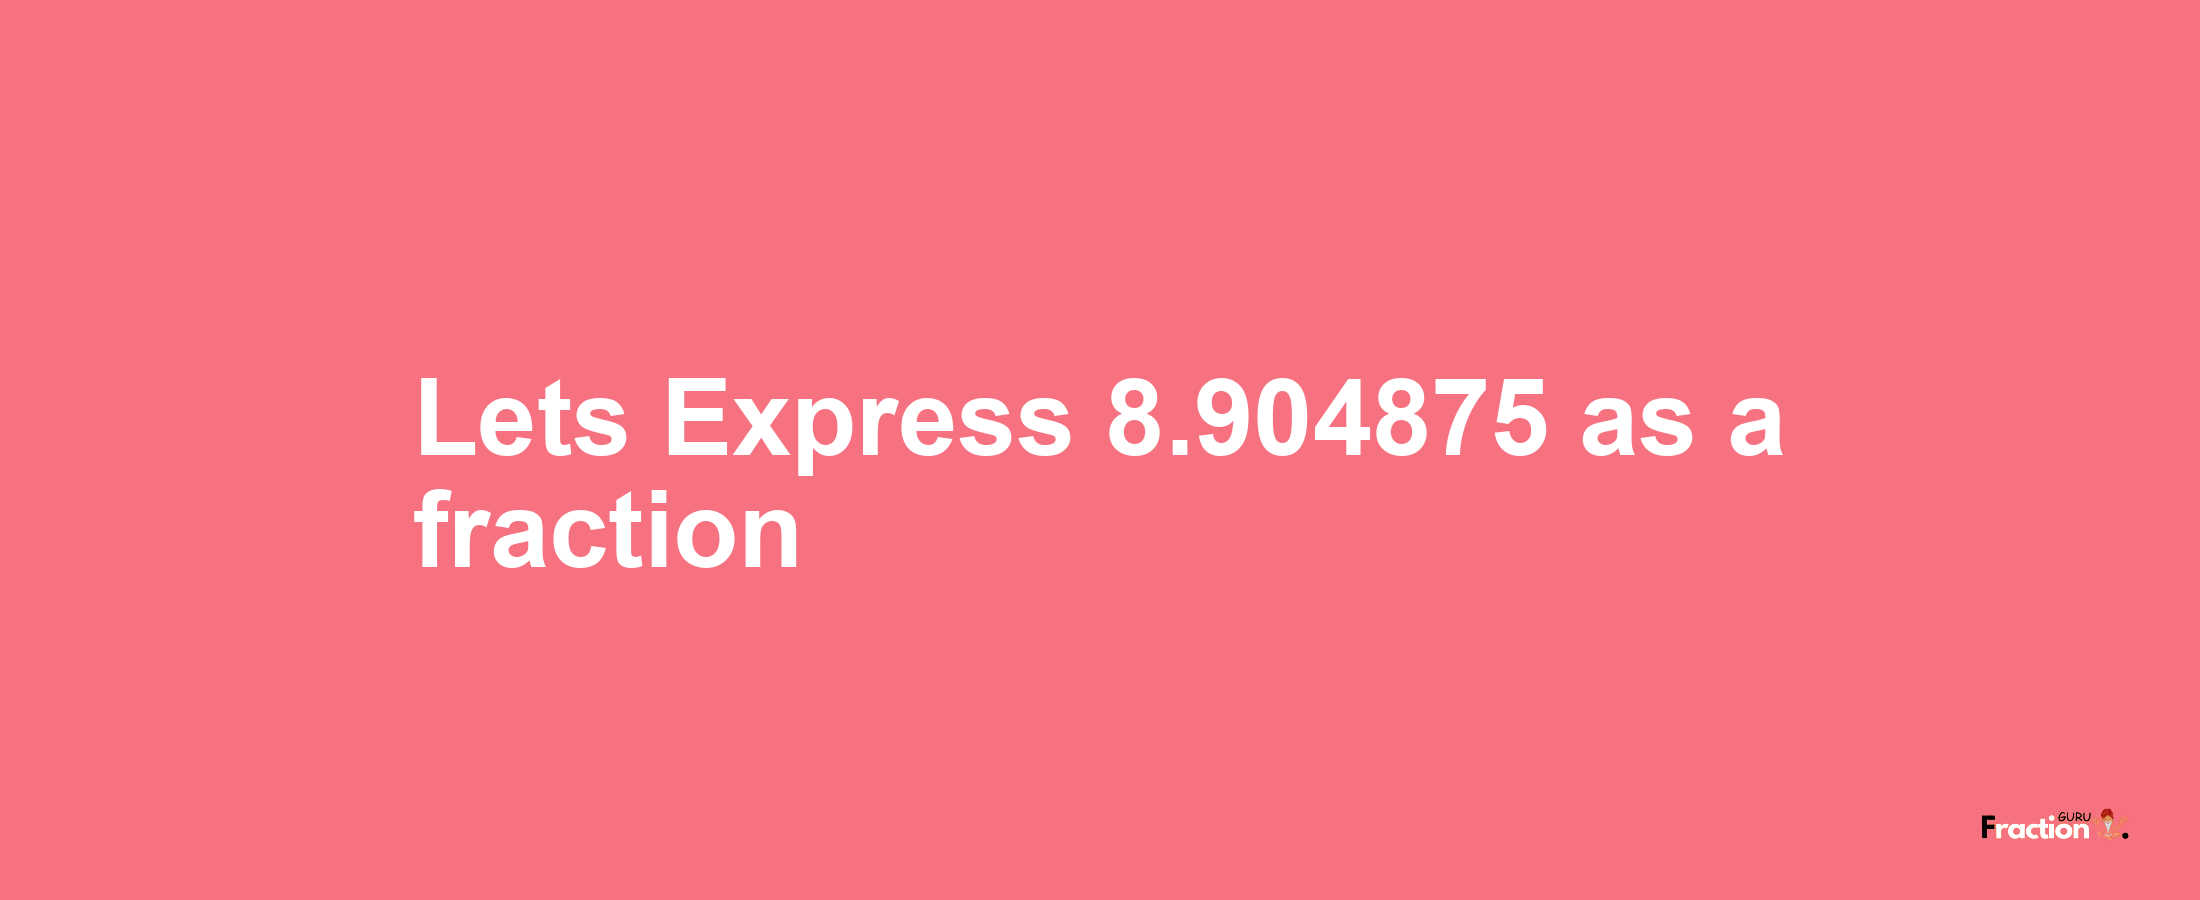 Lets Express 8.904875 as afraction